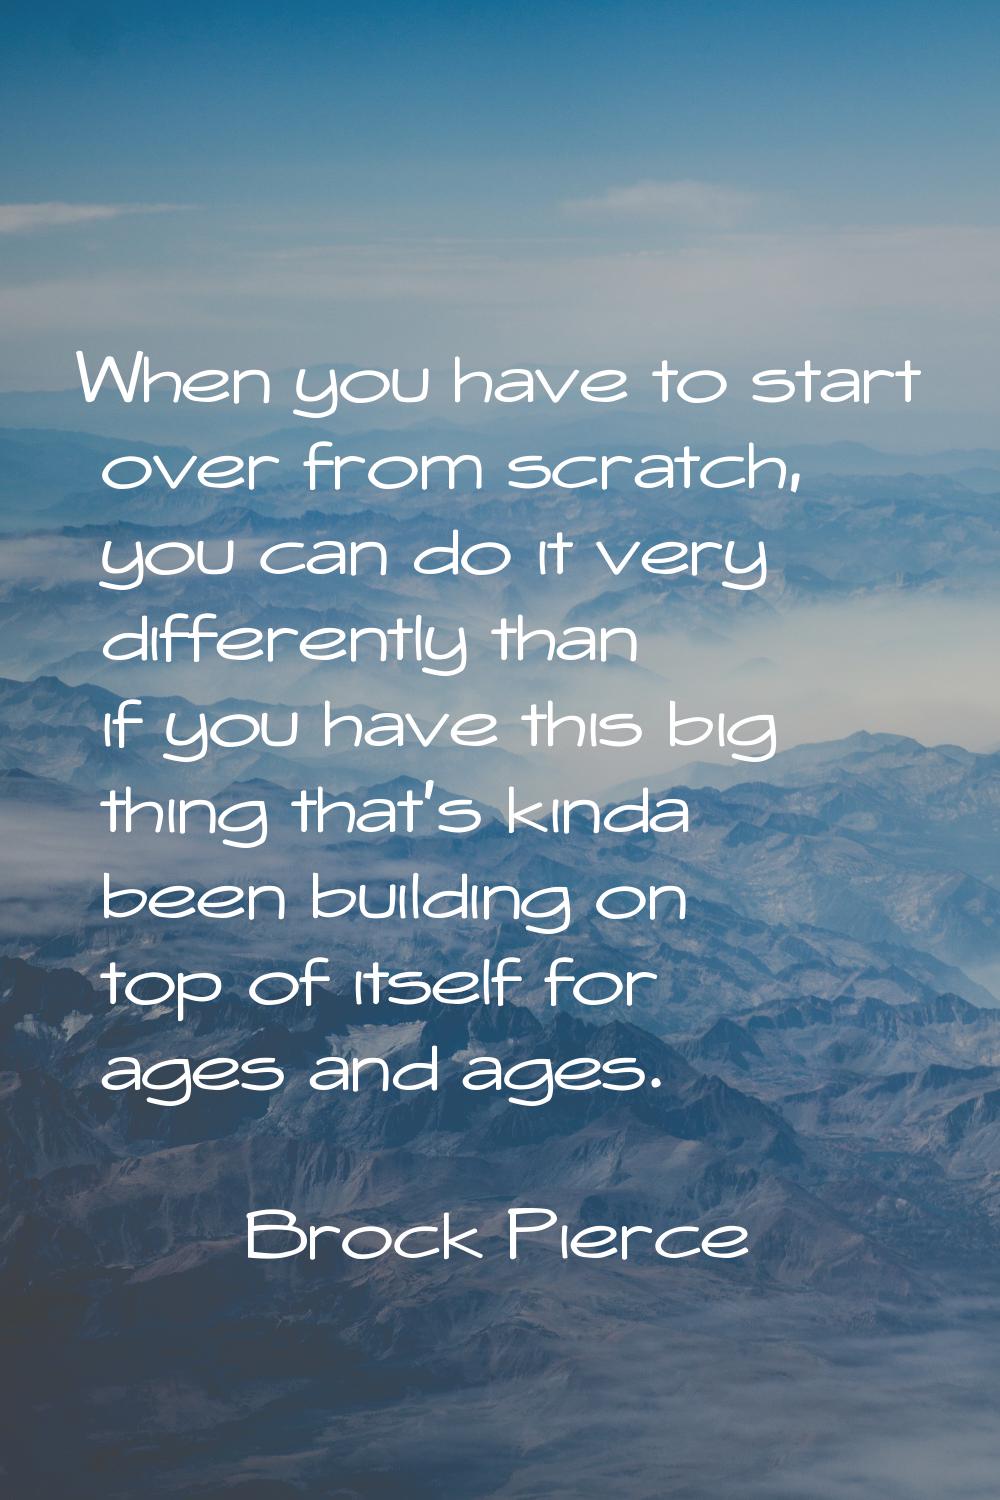 When you have to start over from scratch, you can do it very differently than if you have this big 